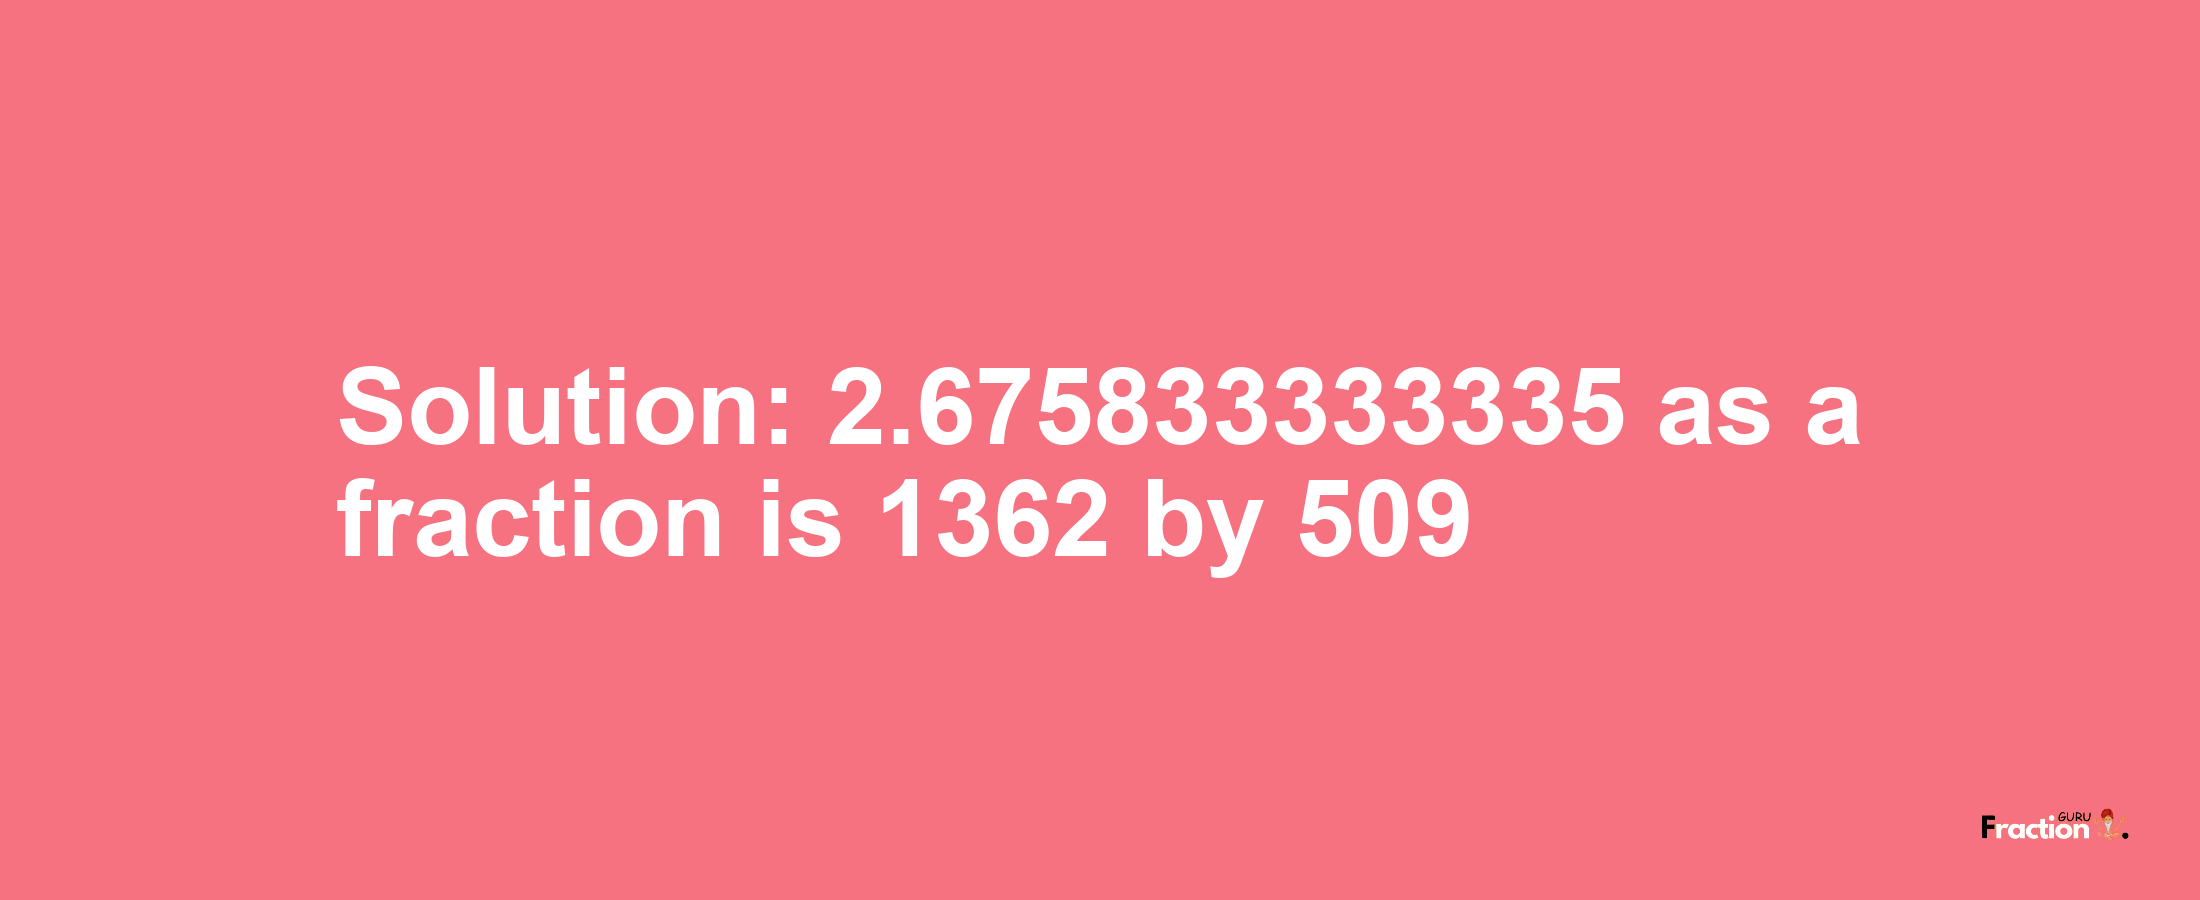 Solution:2.675833333335 as a fraction is 1362/509